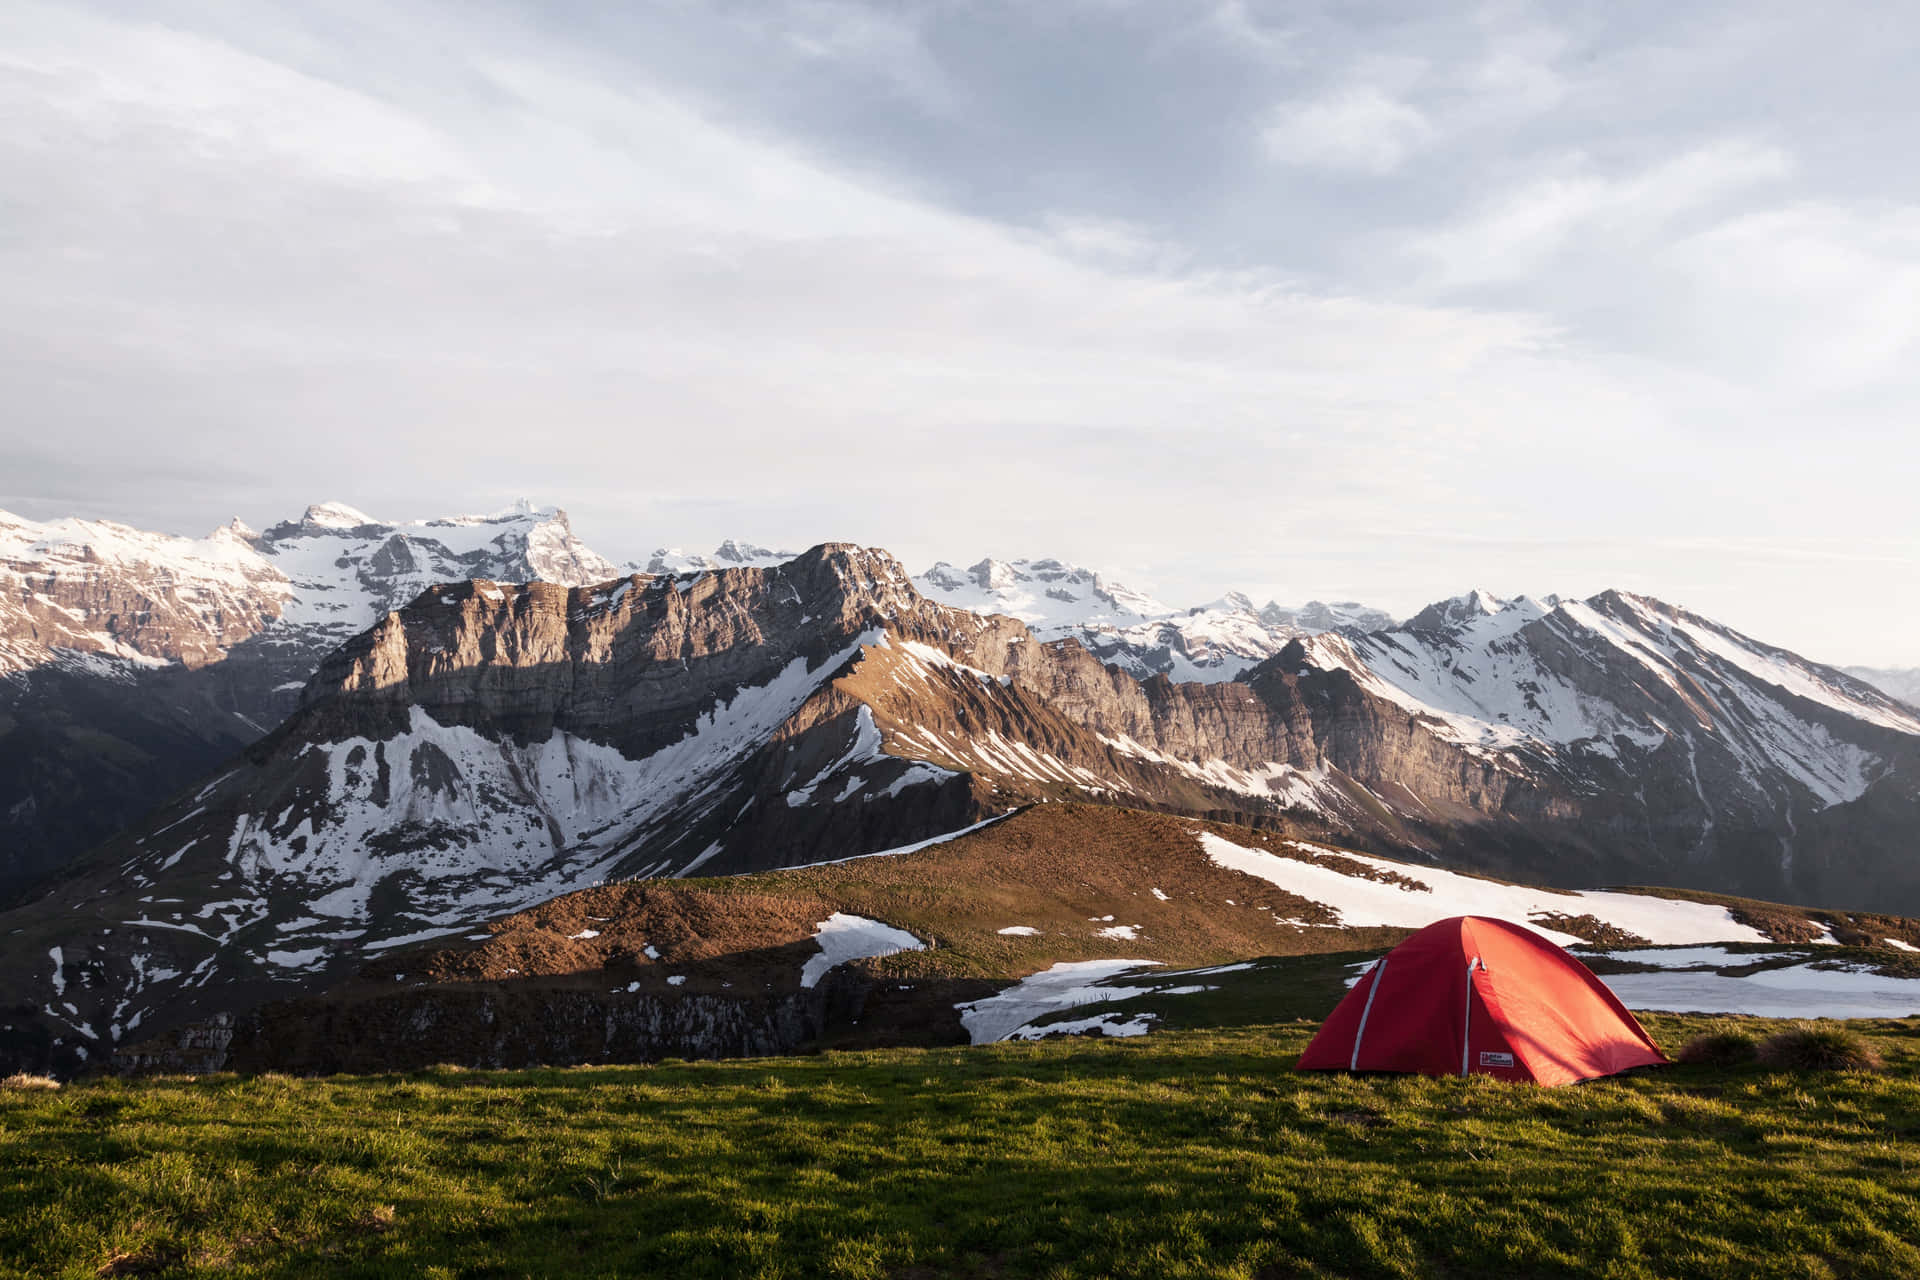 Enjoy the beauty of nature while camping!